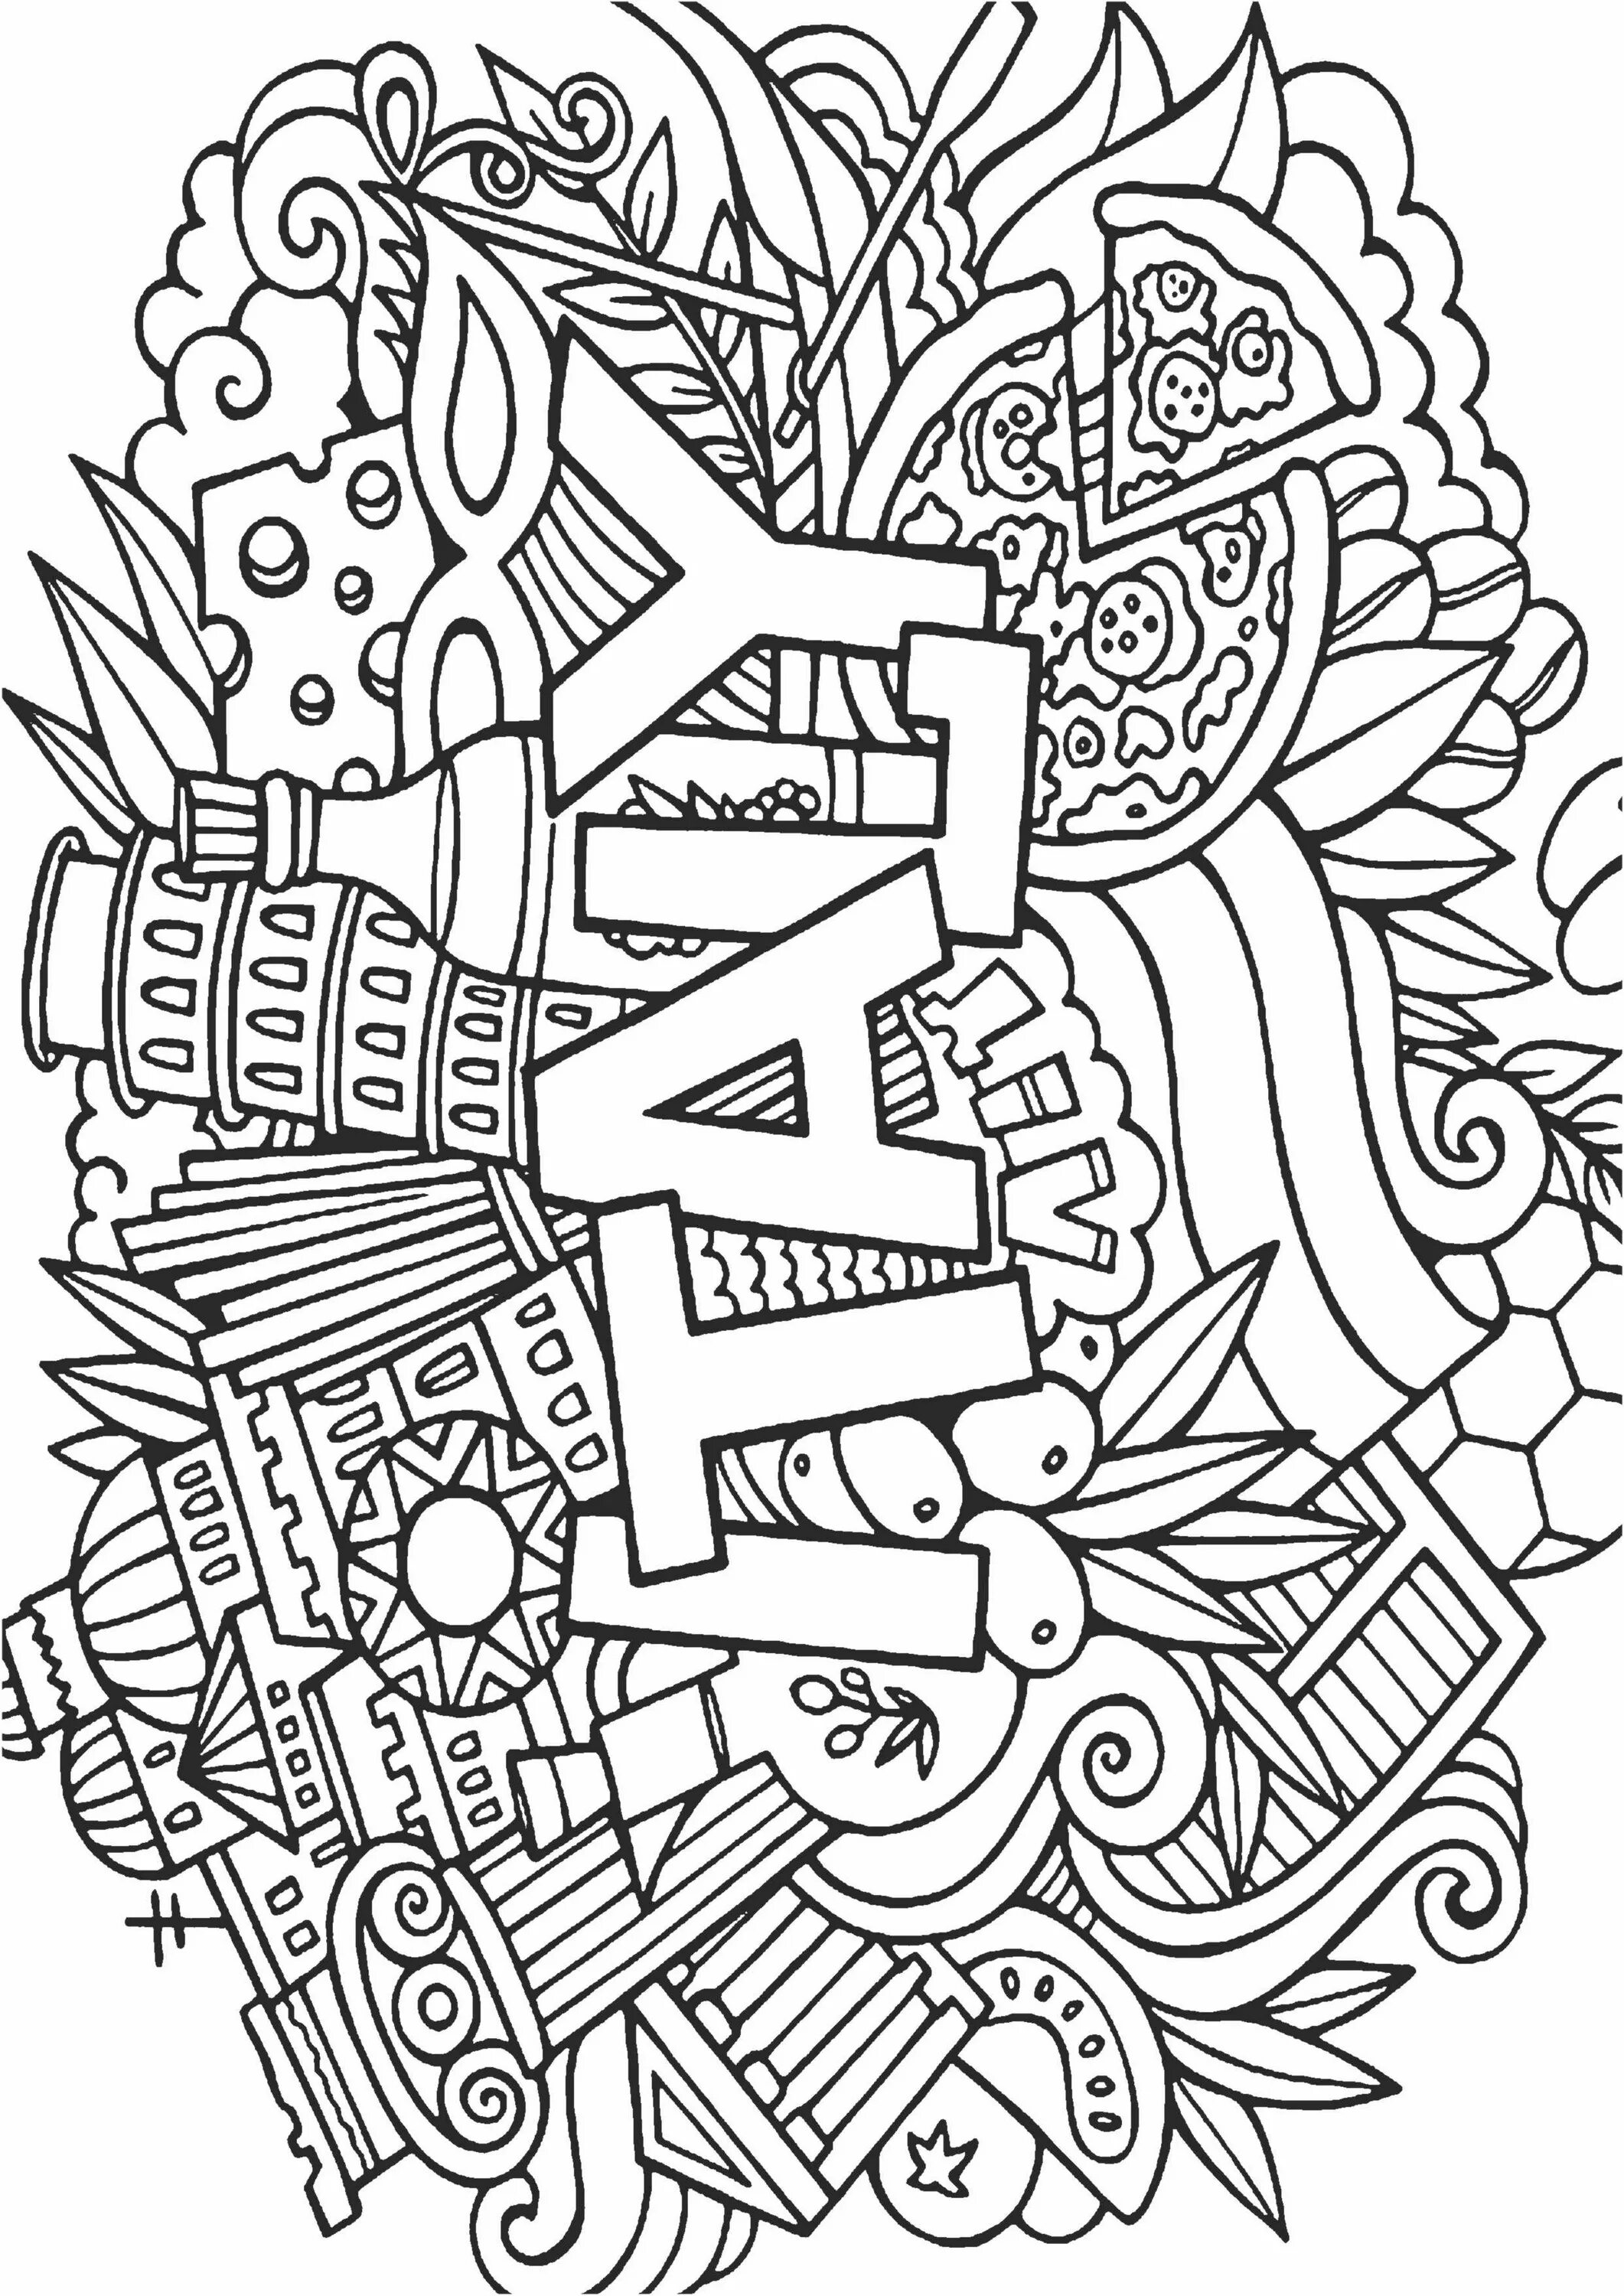 Wonderful coloring page extraordinary